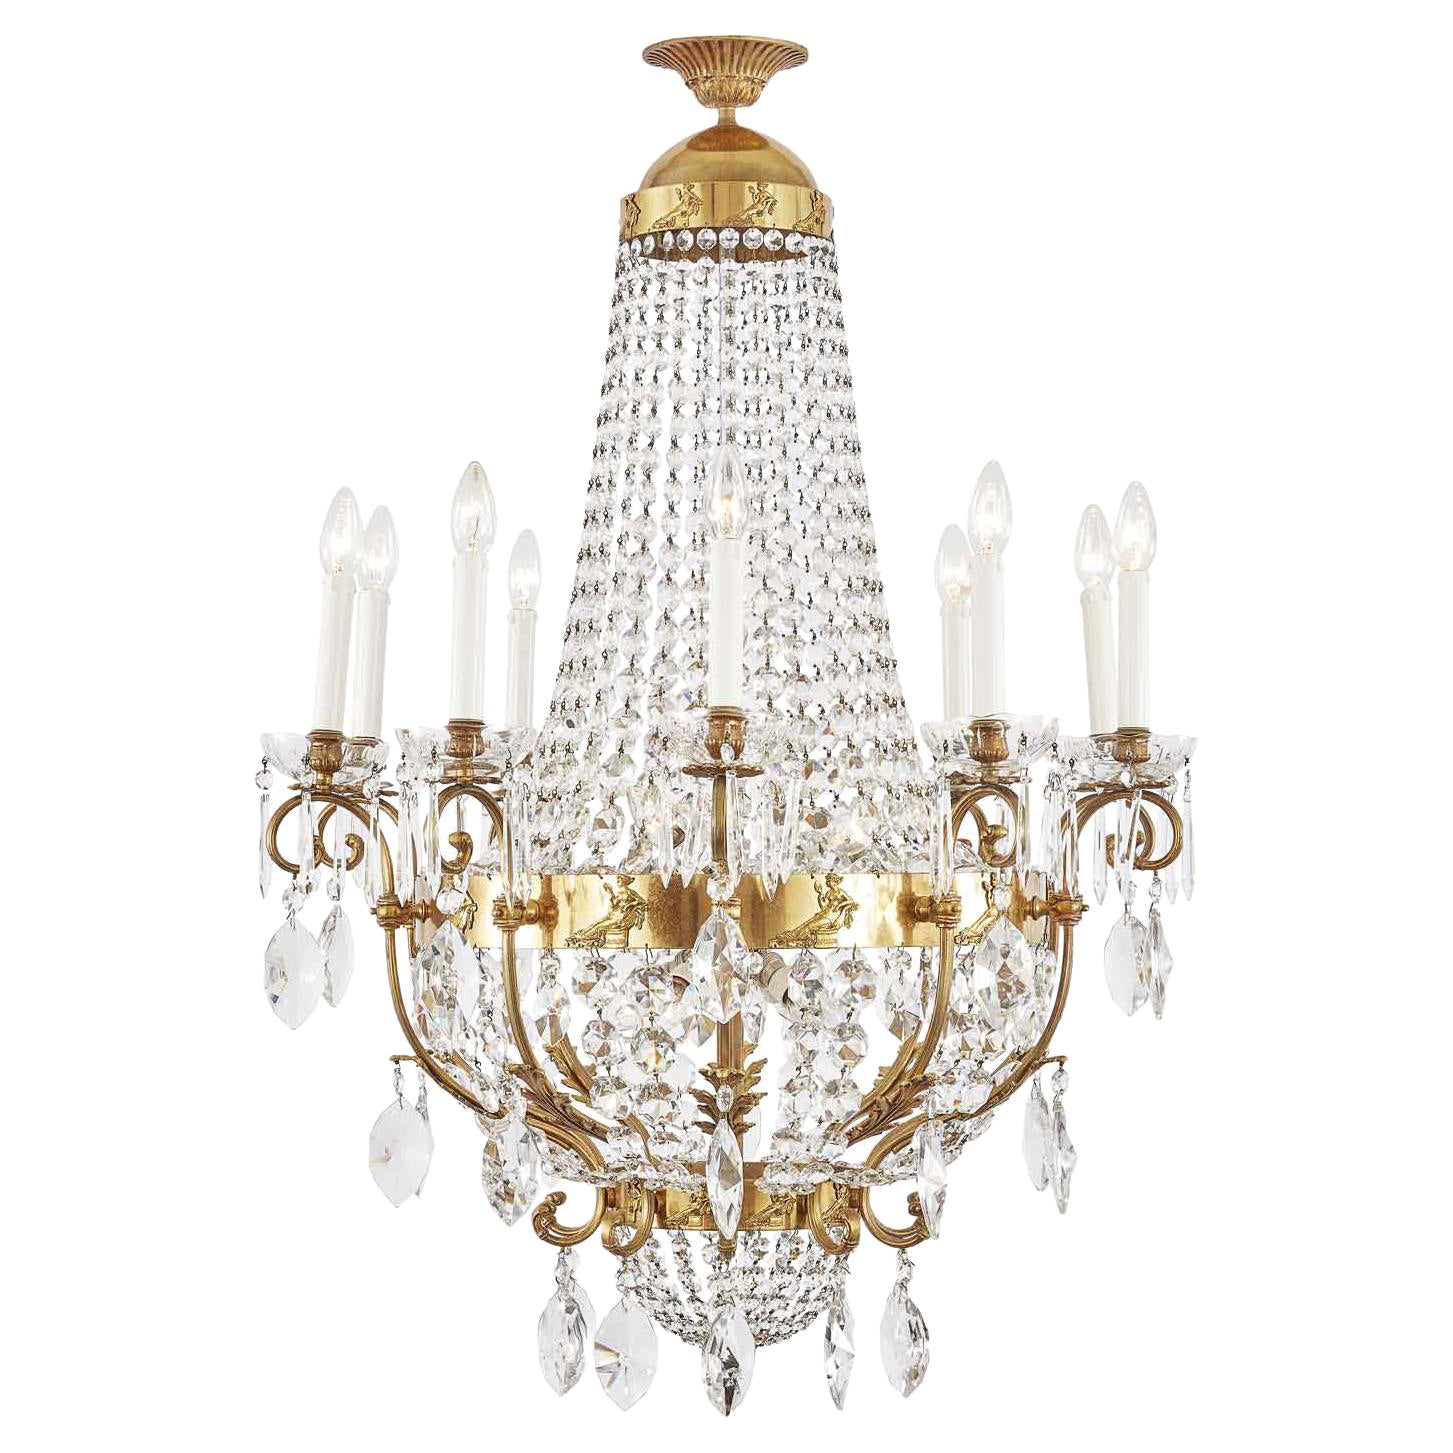 20th Century Italian Neoclassical Style Crystal Chandelier Roman Female Figures For Sale